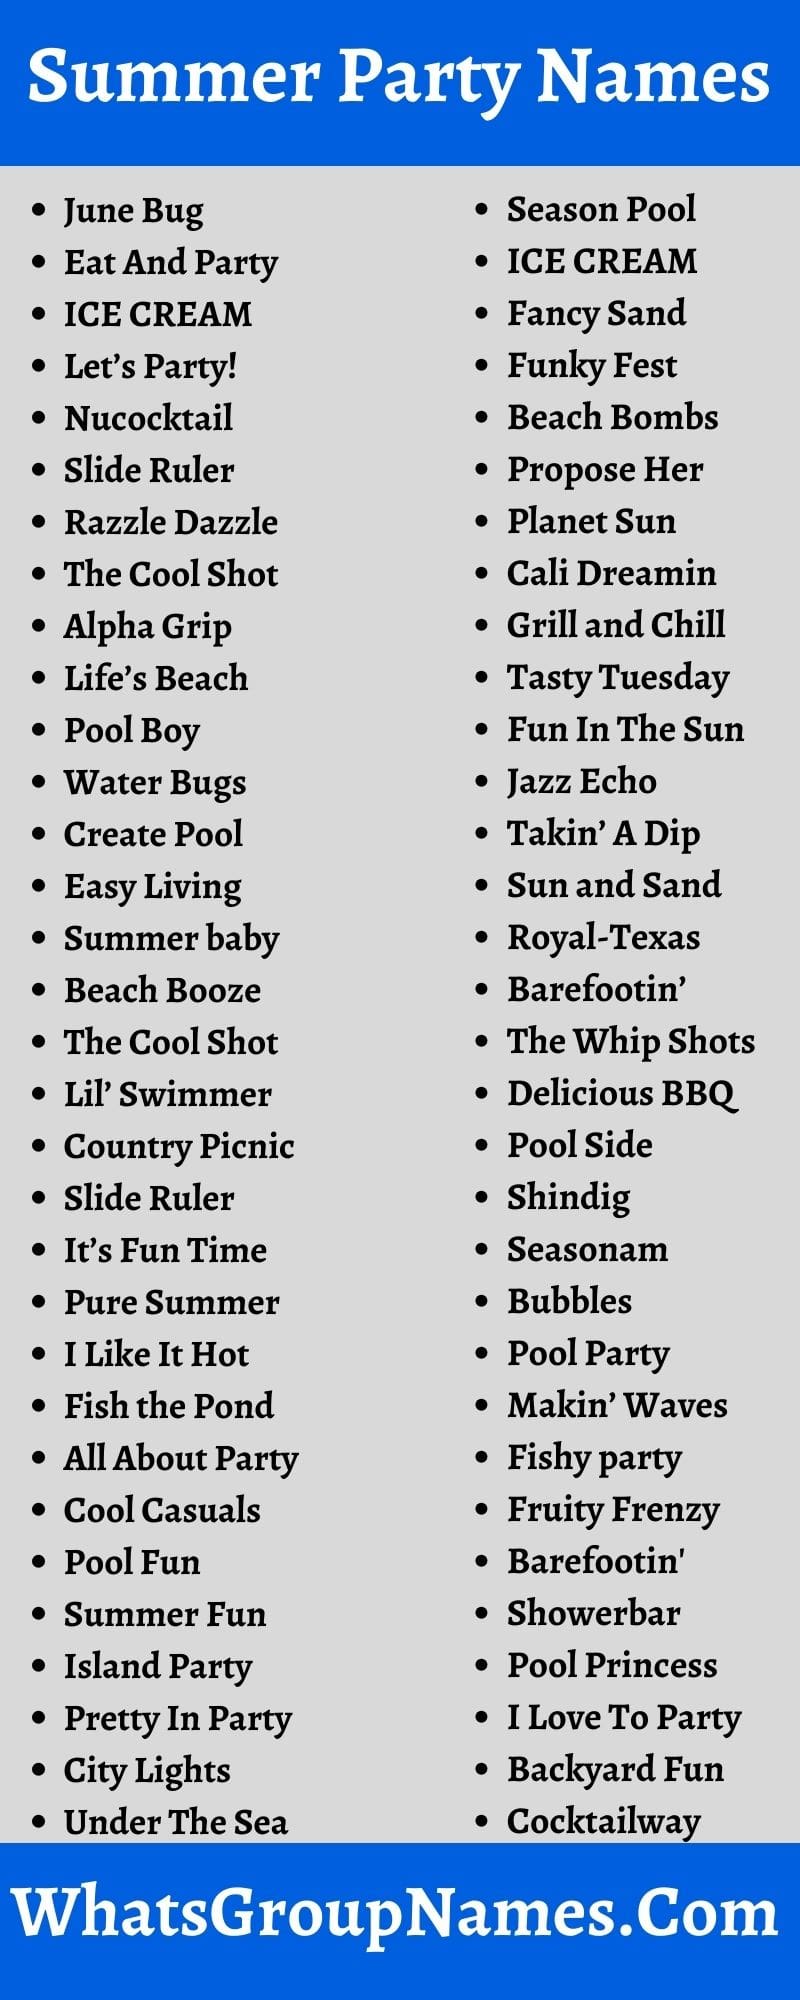 Summer Party Names